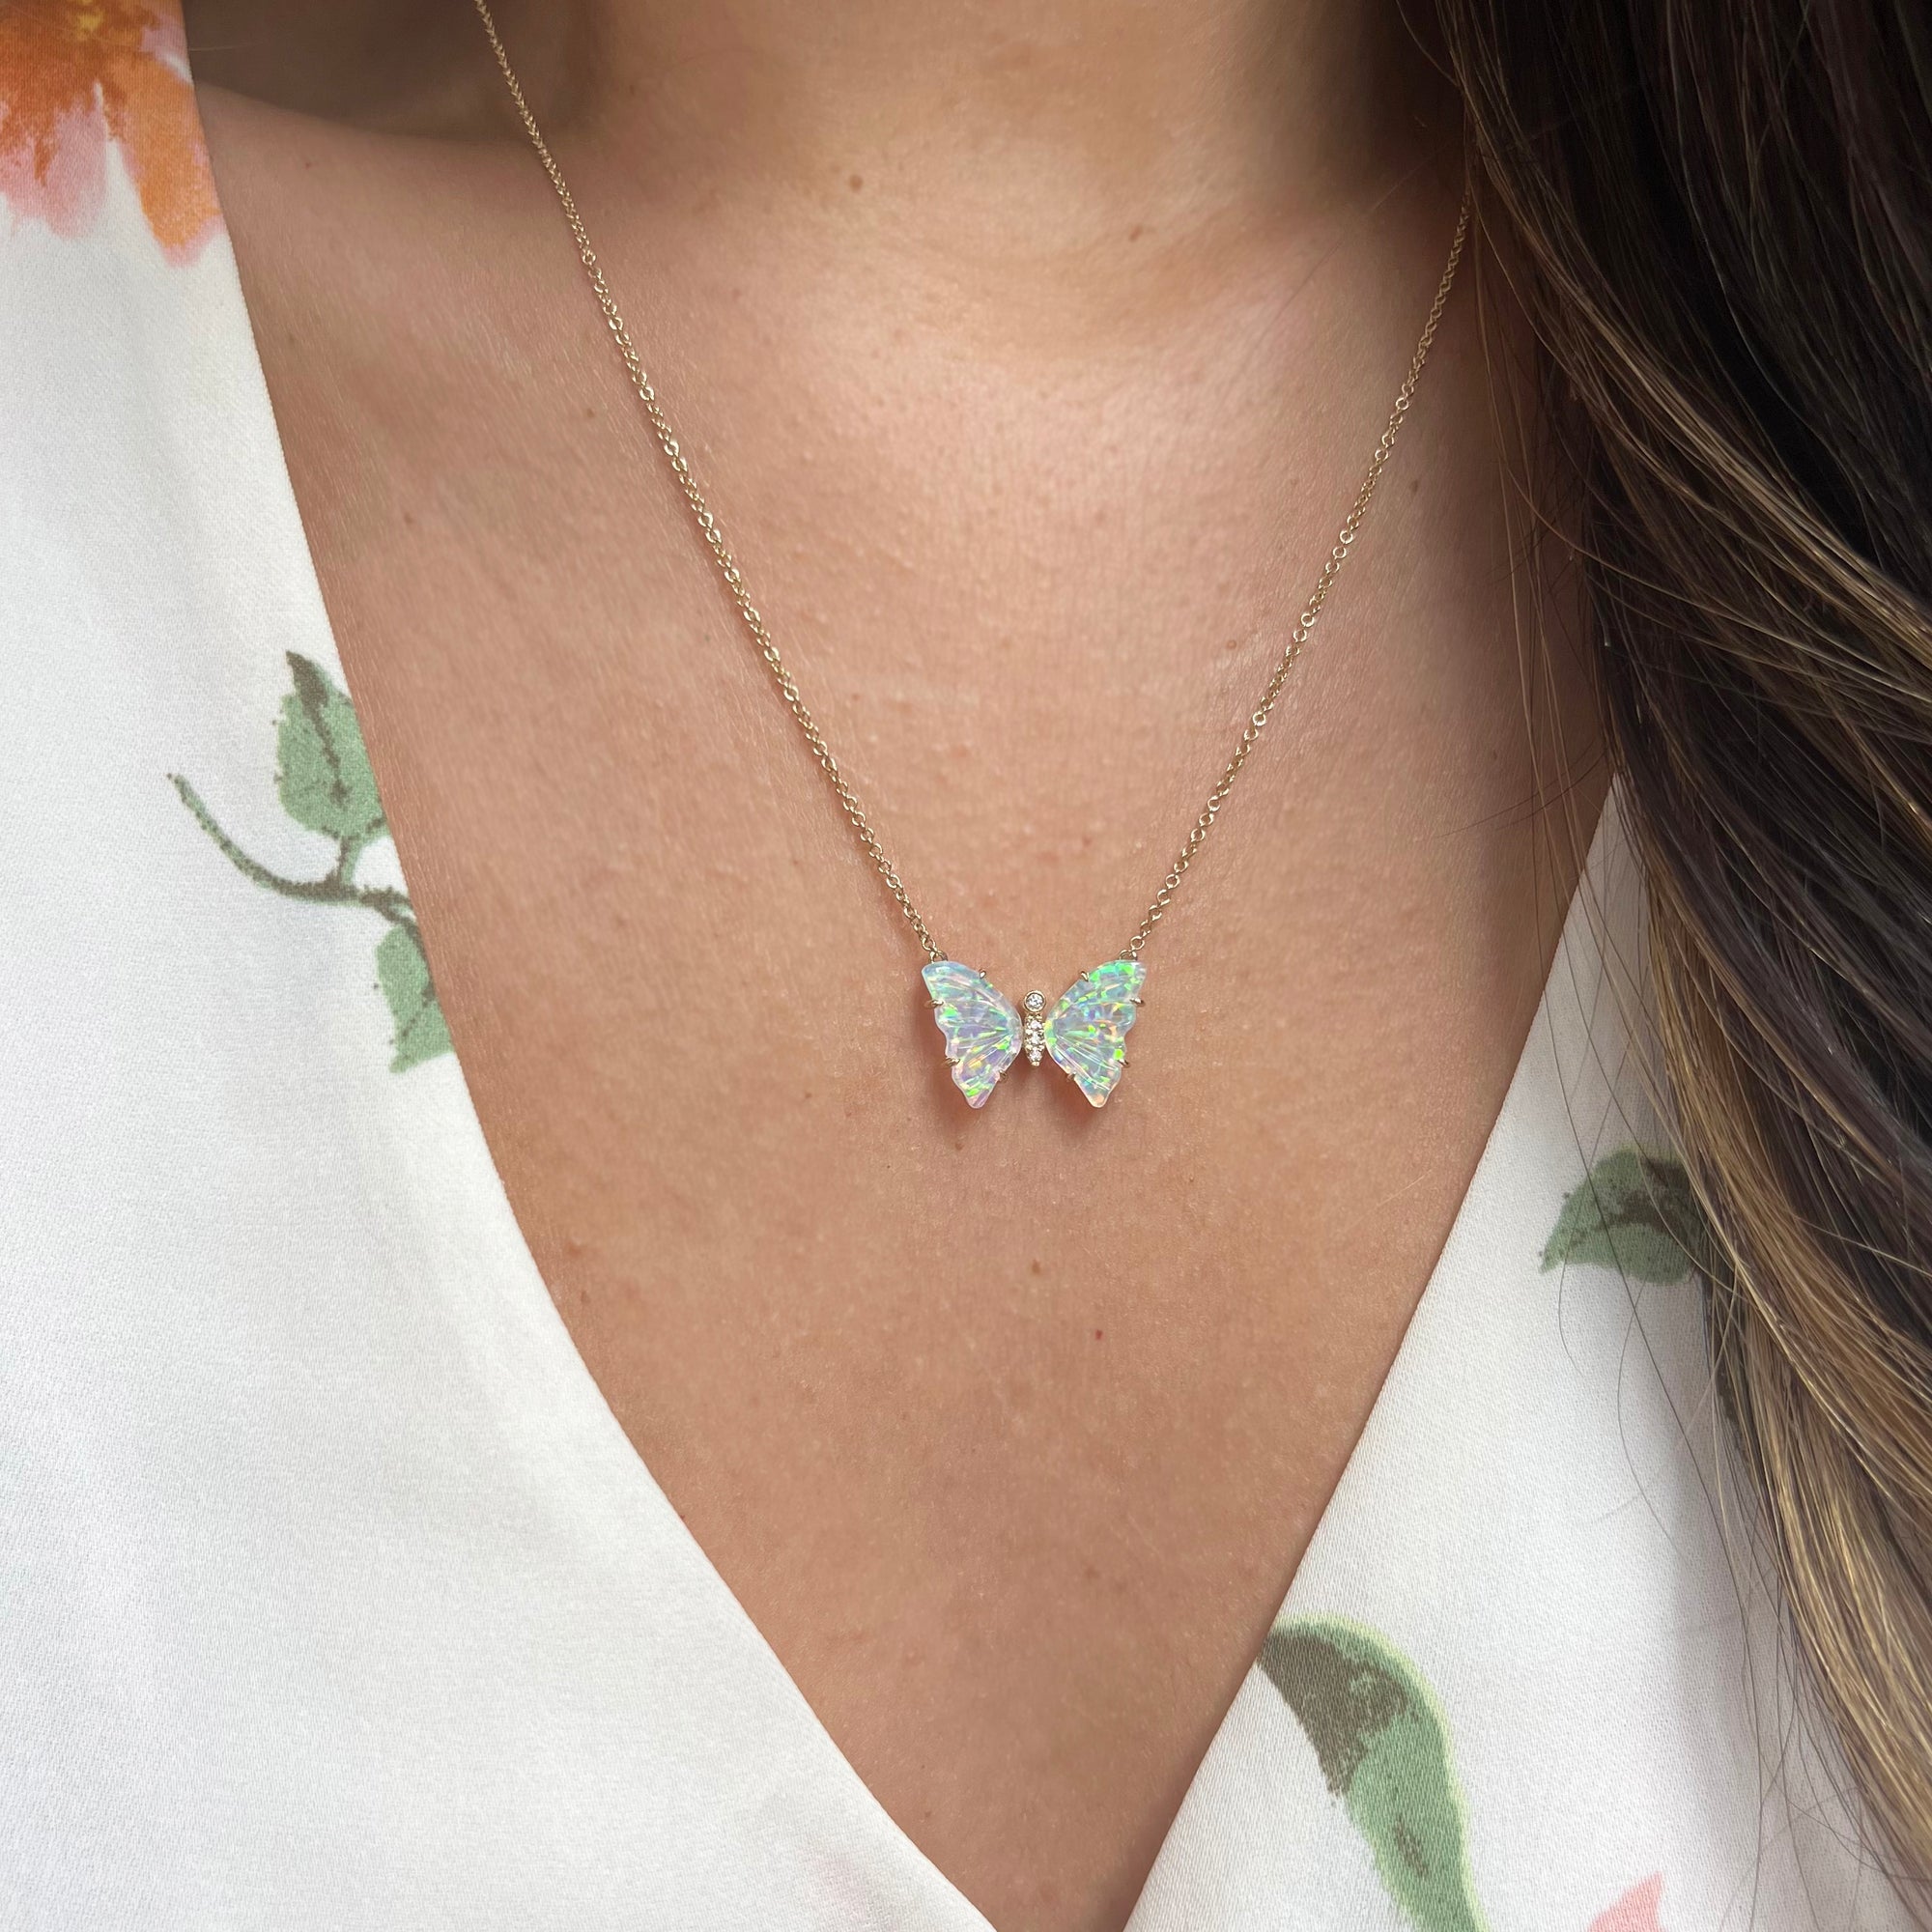 Mini pronged butterfly necklace with diamonds in lab opal